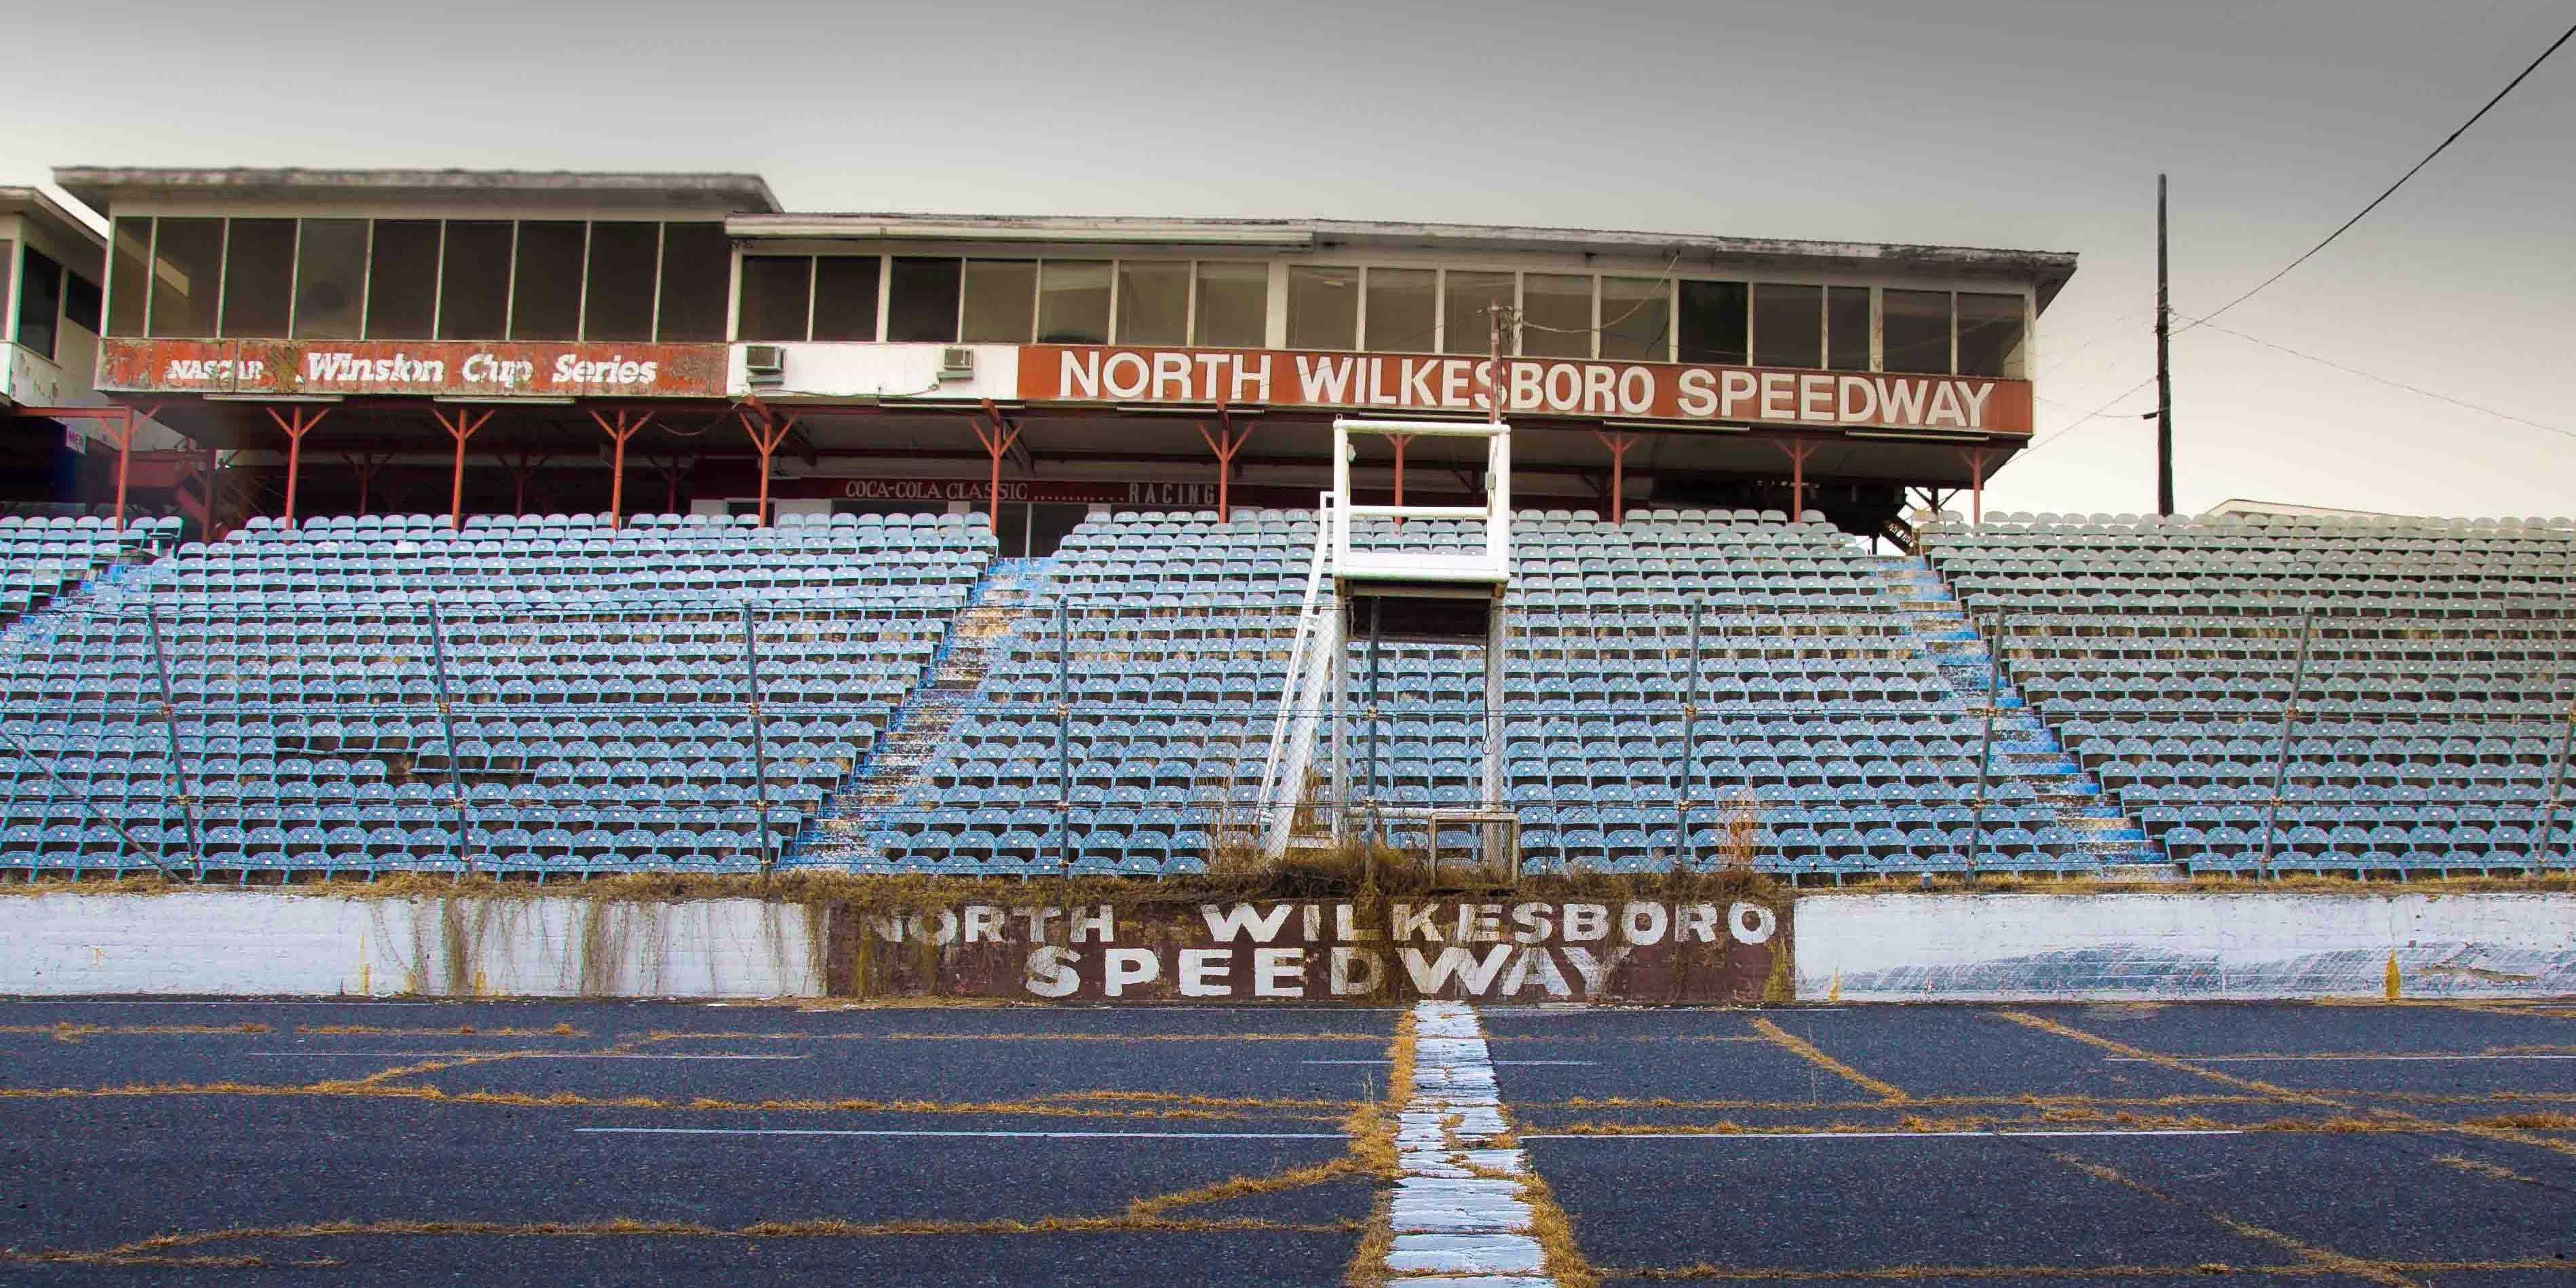 go-inside-an-abandoned-nascar-race-track-thats-been-left-to-rot-for-the-last-20-years.jpg